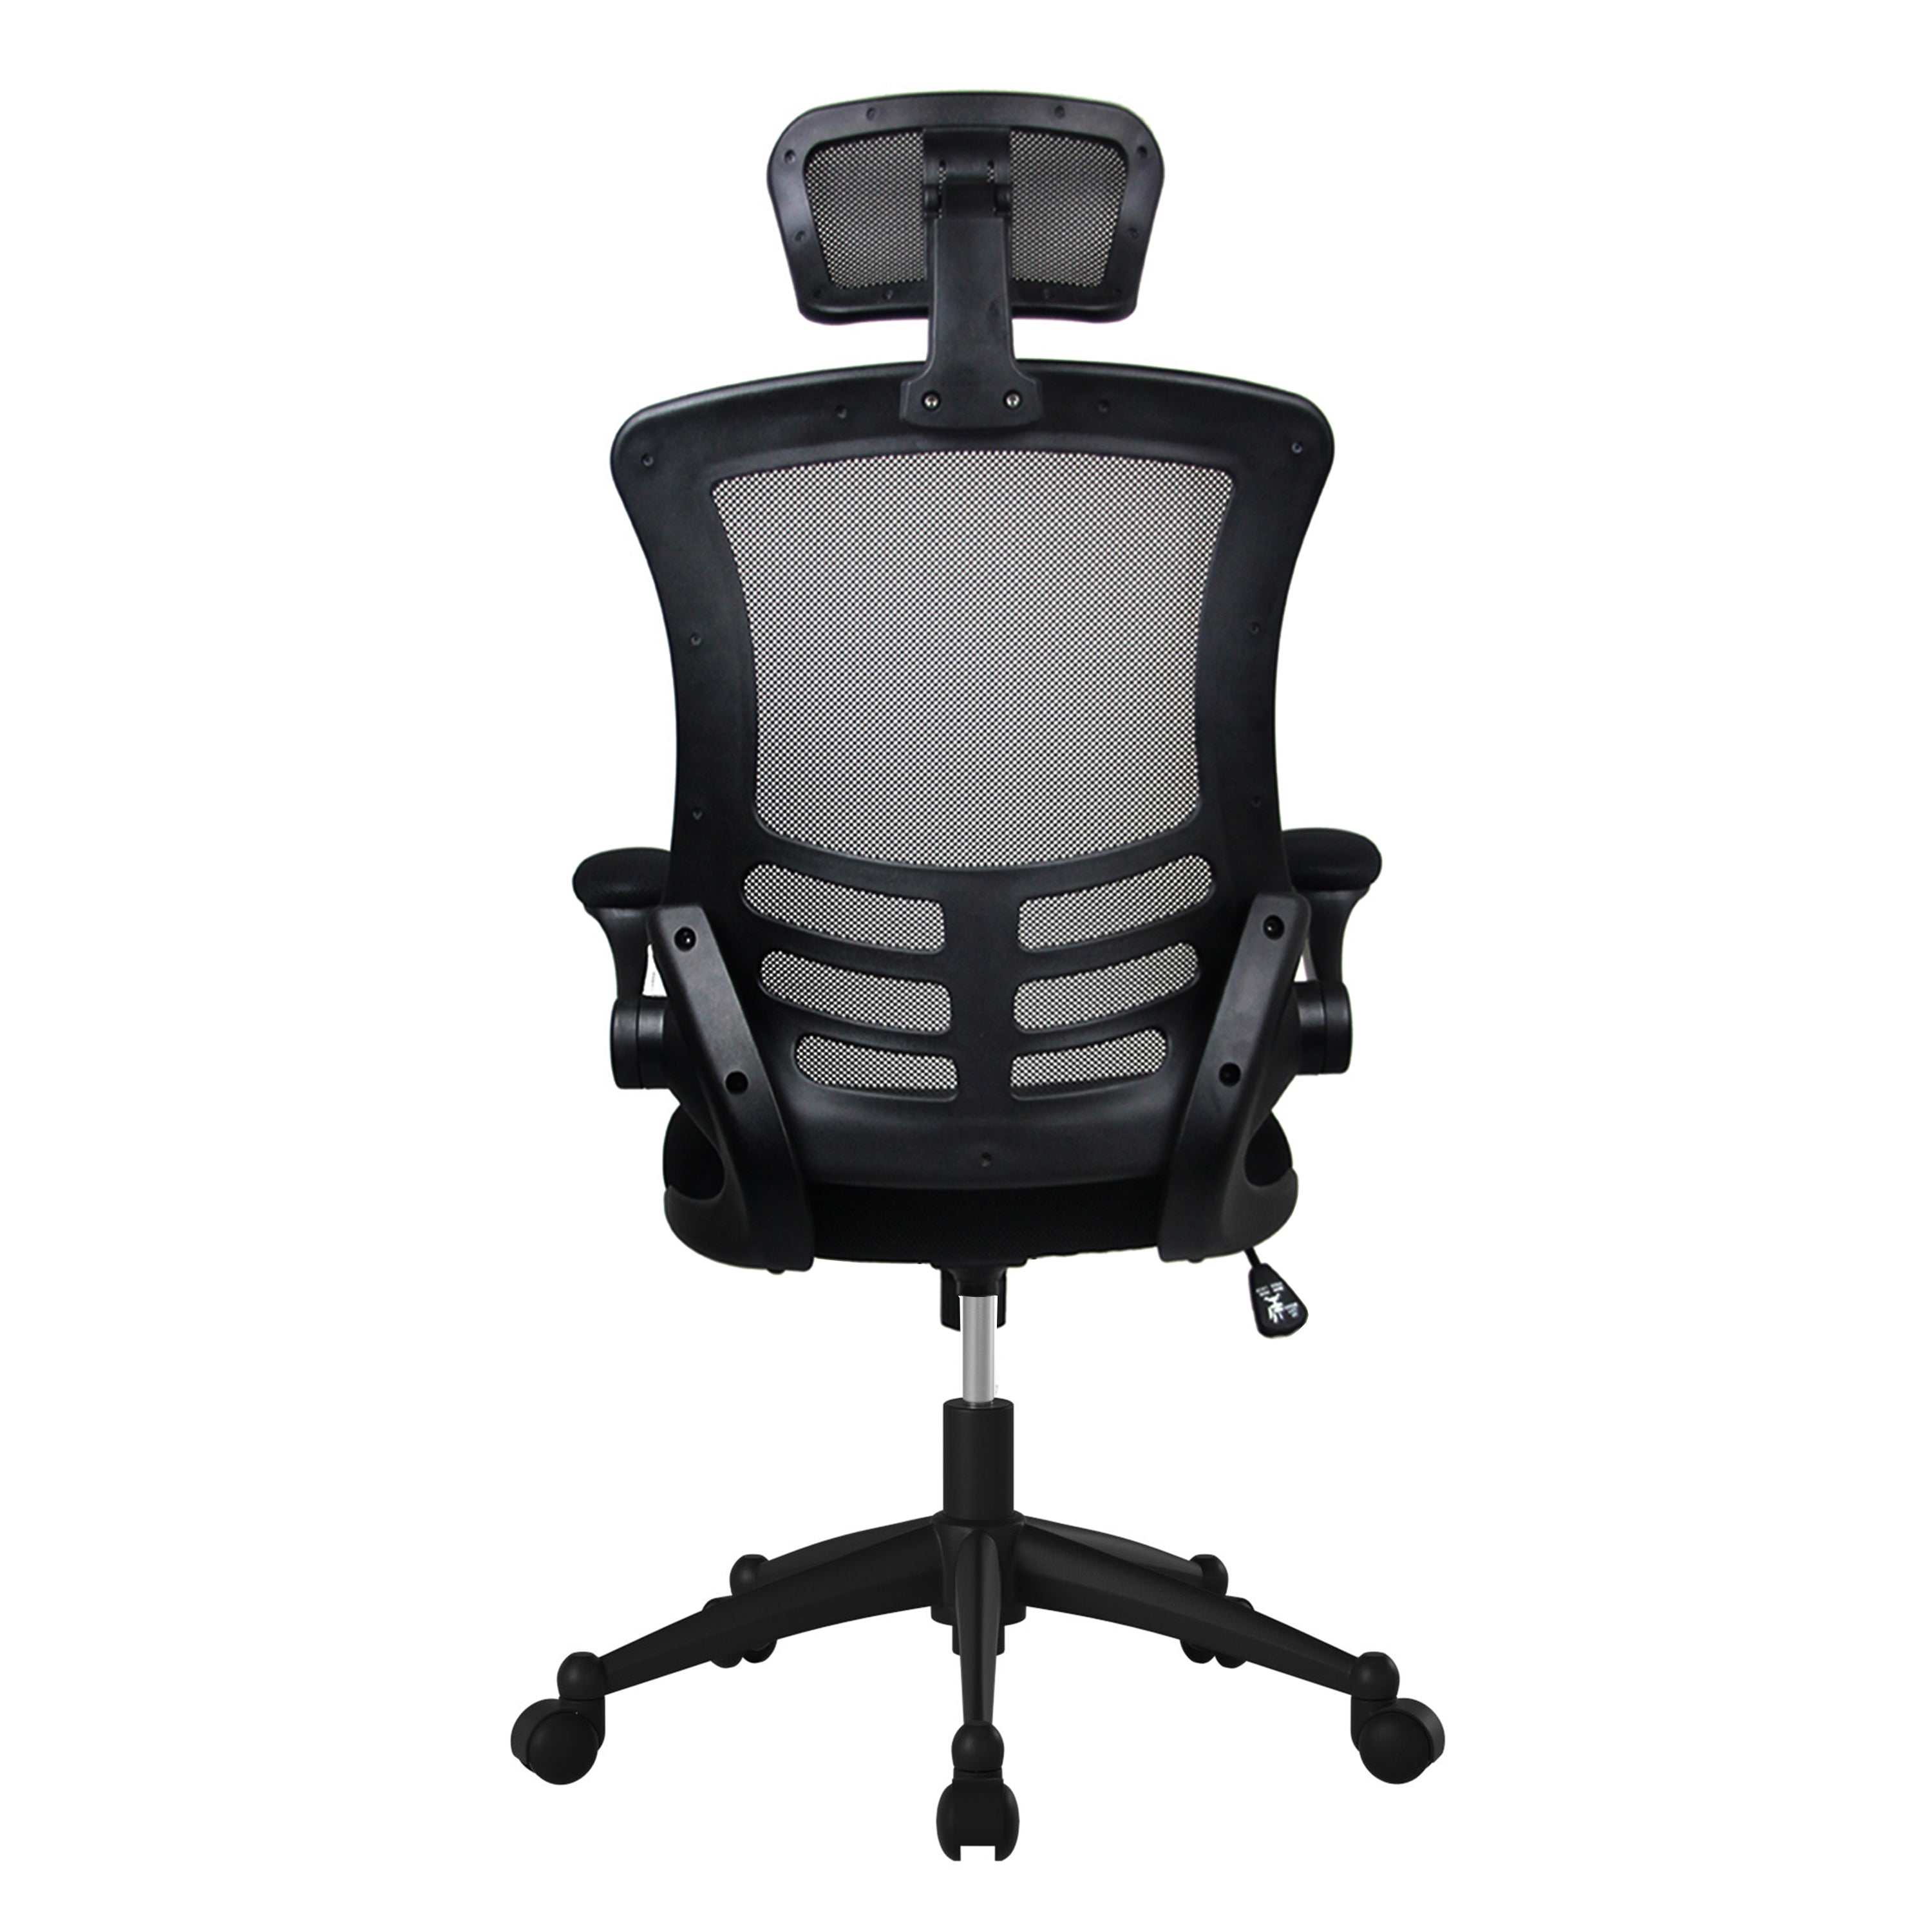 Ergonomic Mesh Office Chair, High Back Desk Chair - Adjustable Headrest, 3D  Self-adaptive Lumbar Support, Up to 145° Tilt, Liftable Thickened Seat and  PU Wheels, 360° Swivel Computer Task Chair 